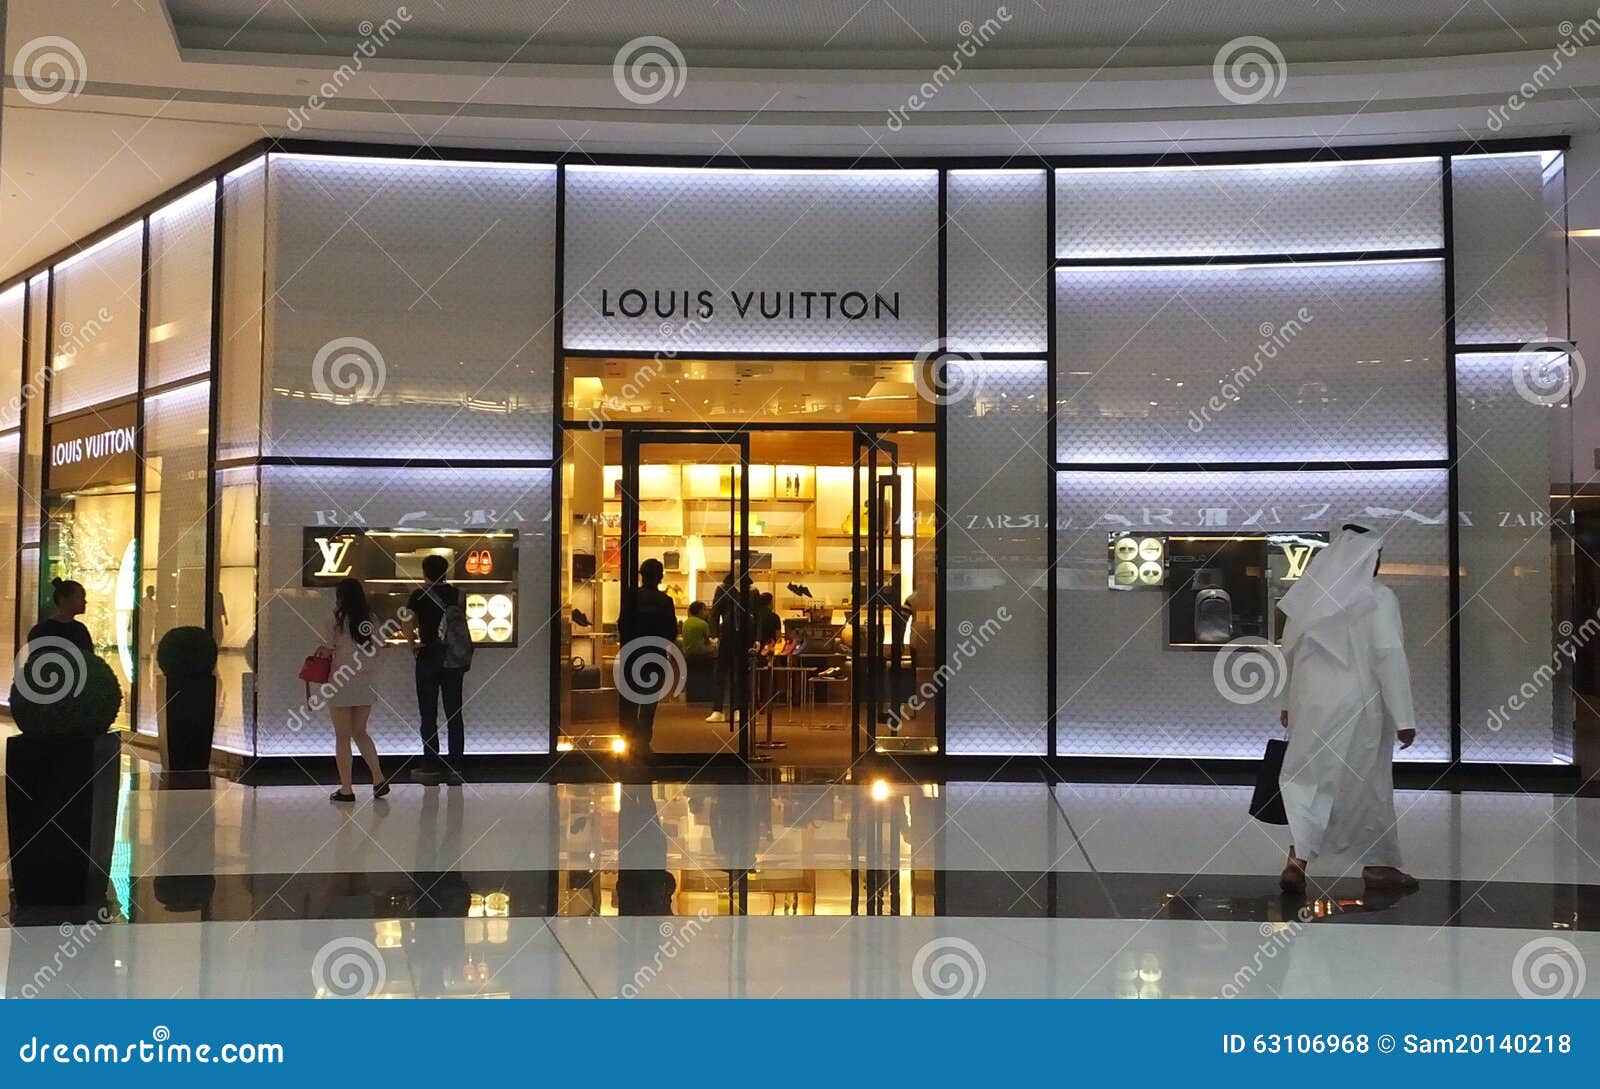 CPP-LUXURY.COM on X: Louis Vuitton opens jewellery popup in Dubai at The  Dubai Mall #LouisVuitton #LVJewellery #LVVolt #Volt #luxury #luxuryjewelry  #finejewelry #Dubai #TheDubaiMall #DubaiMall #Emaar @LouisVuitton  @TheDubaiMall